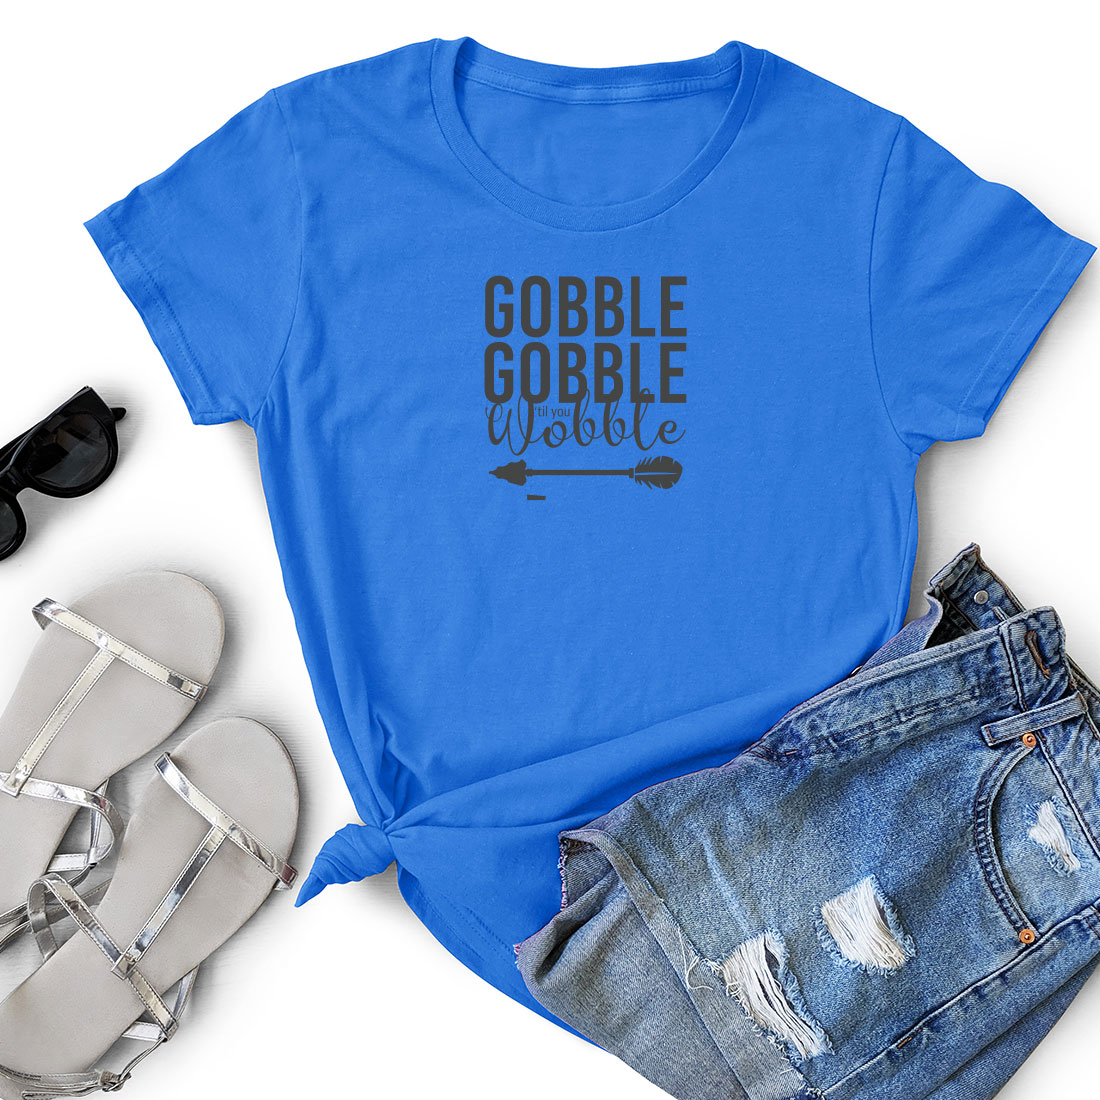 T - shirt that says gobble gobble while next to a pair of.